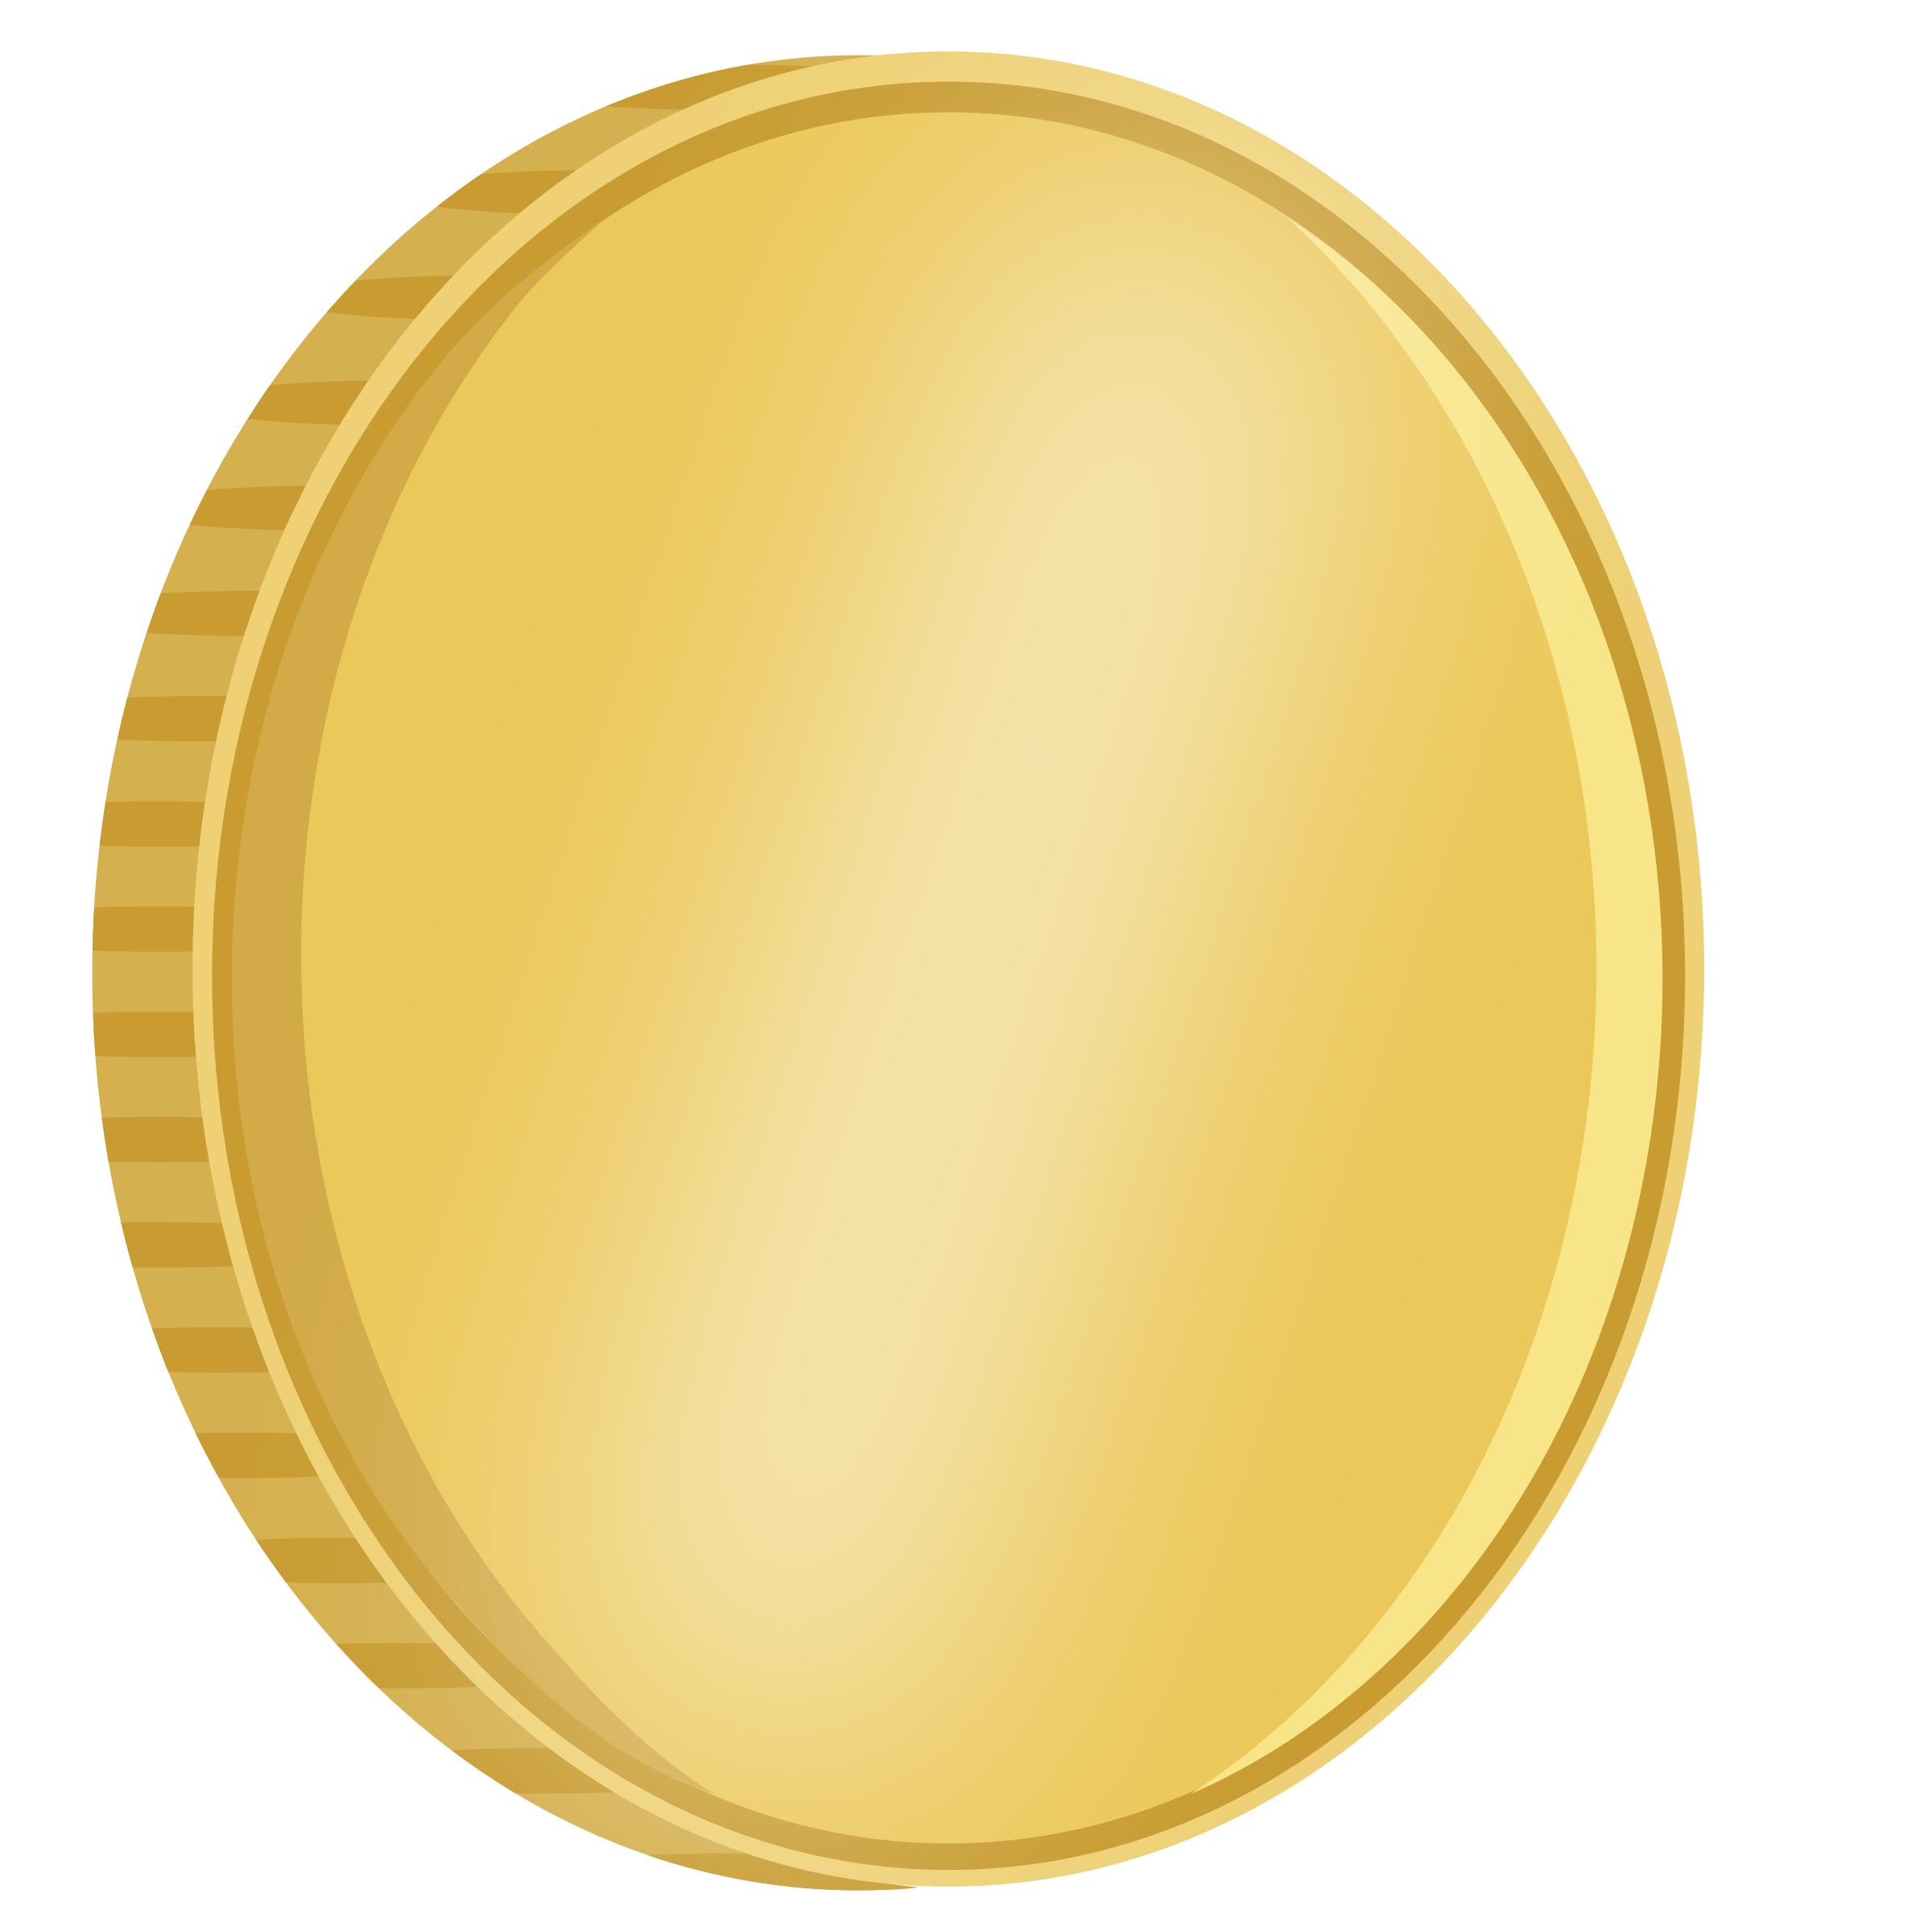 Spinning coin 2 png